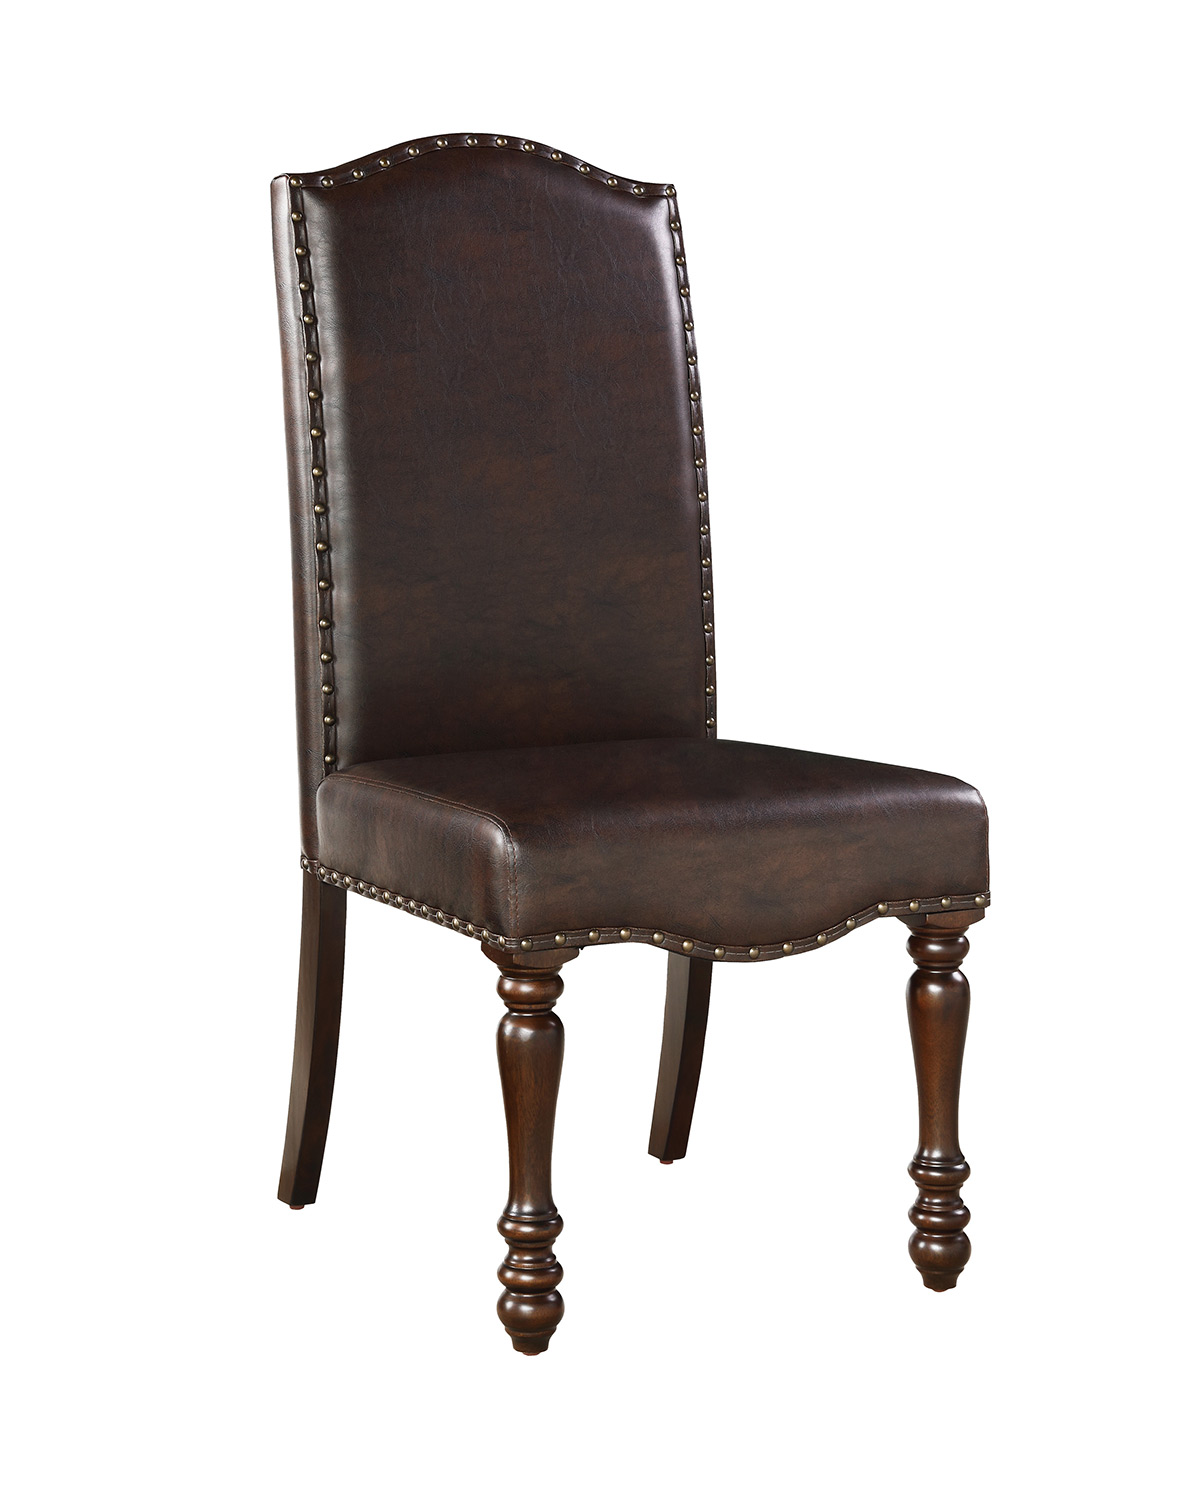 Homelegance Hargreave Side Chair - Cherry